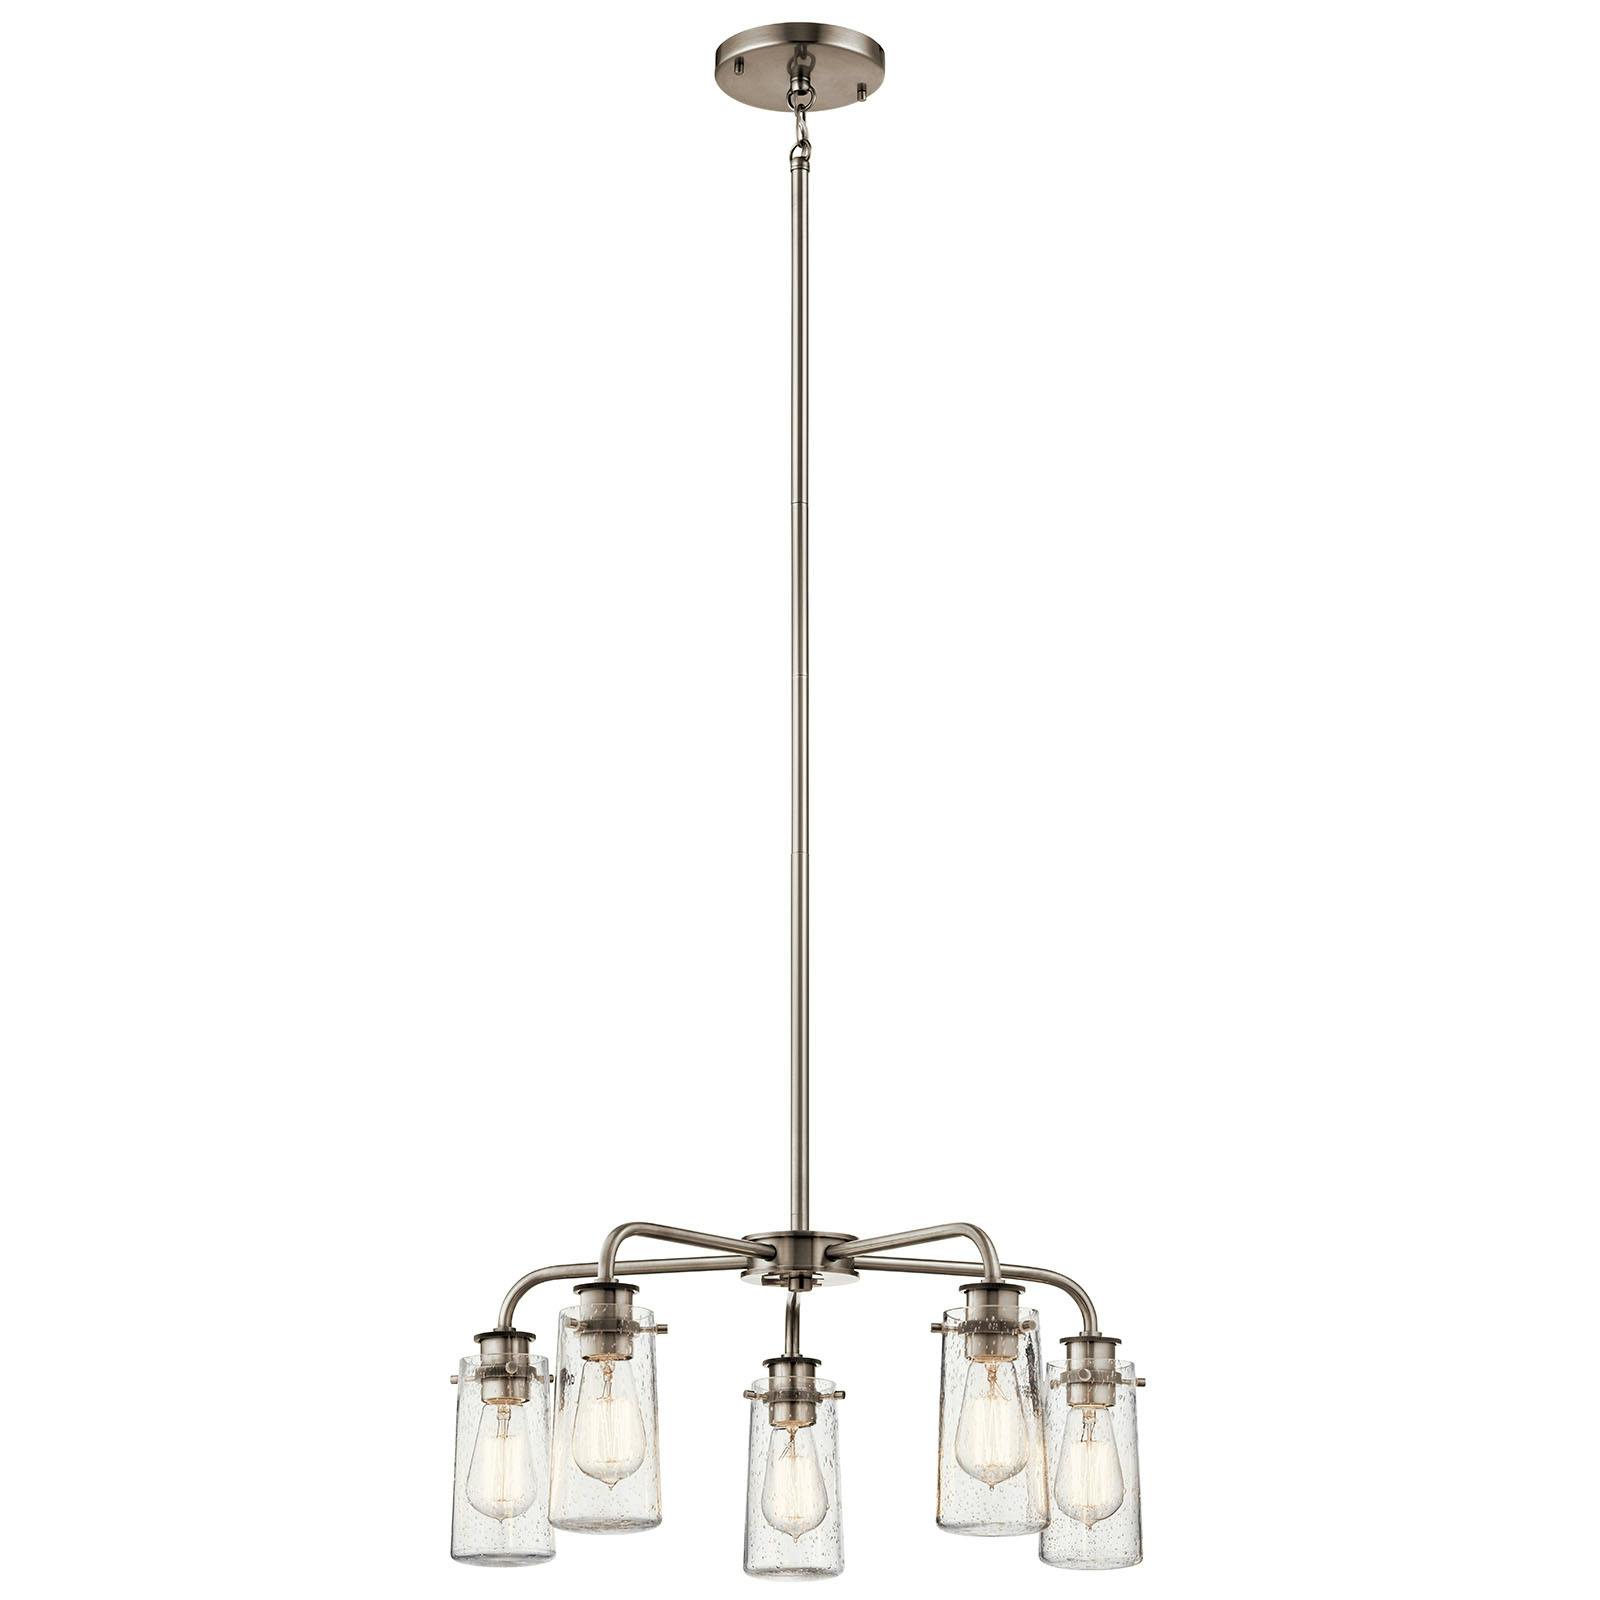 Braelyn Chandelier Classic Pewter on a white background